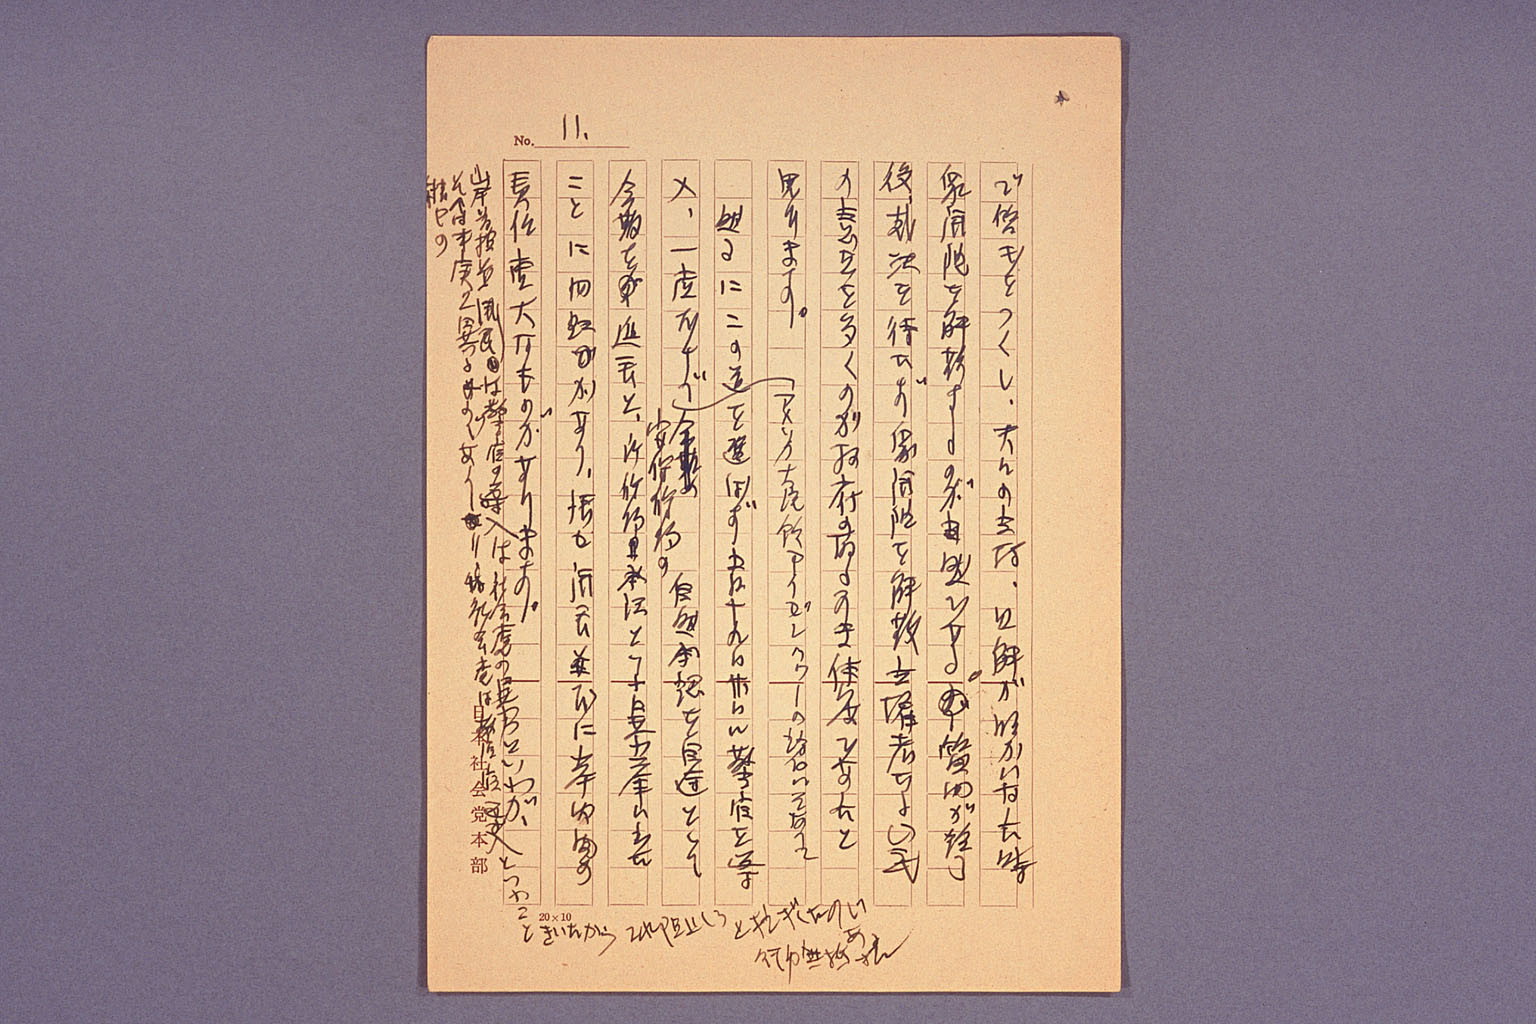 Speech autograph in which dissolution of the Diet was demanded (larger)